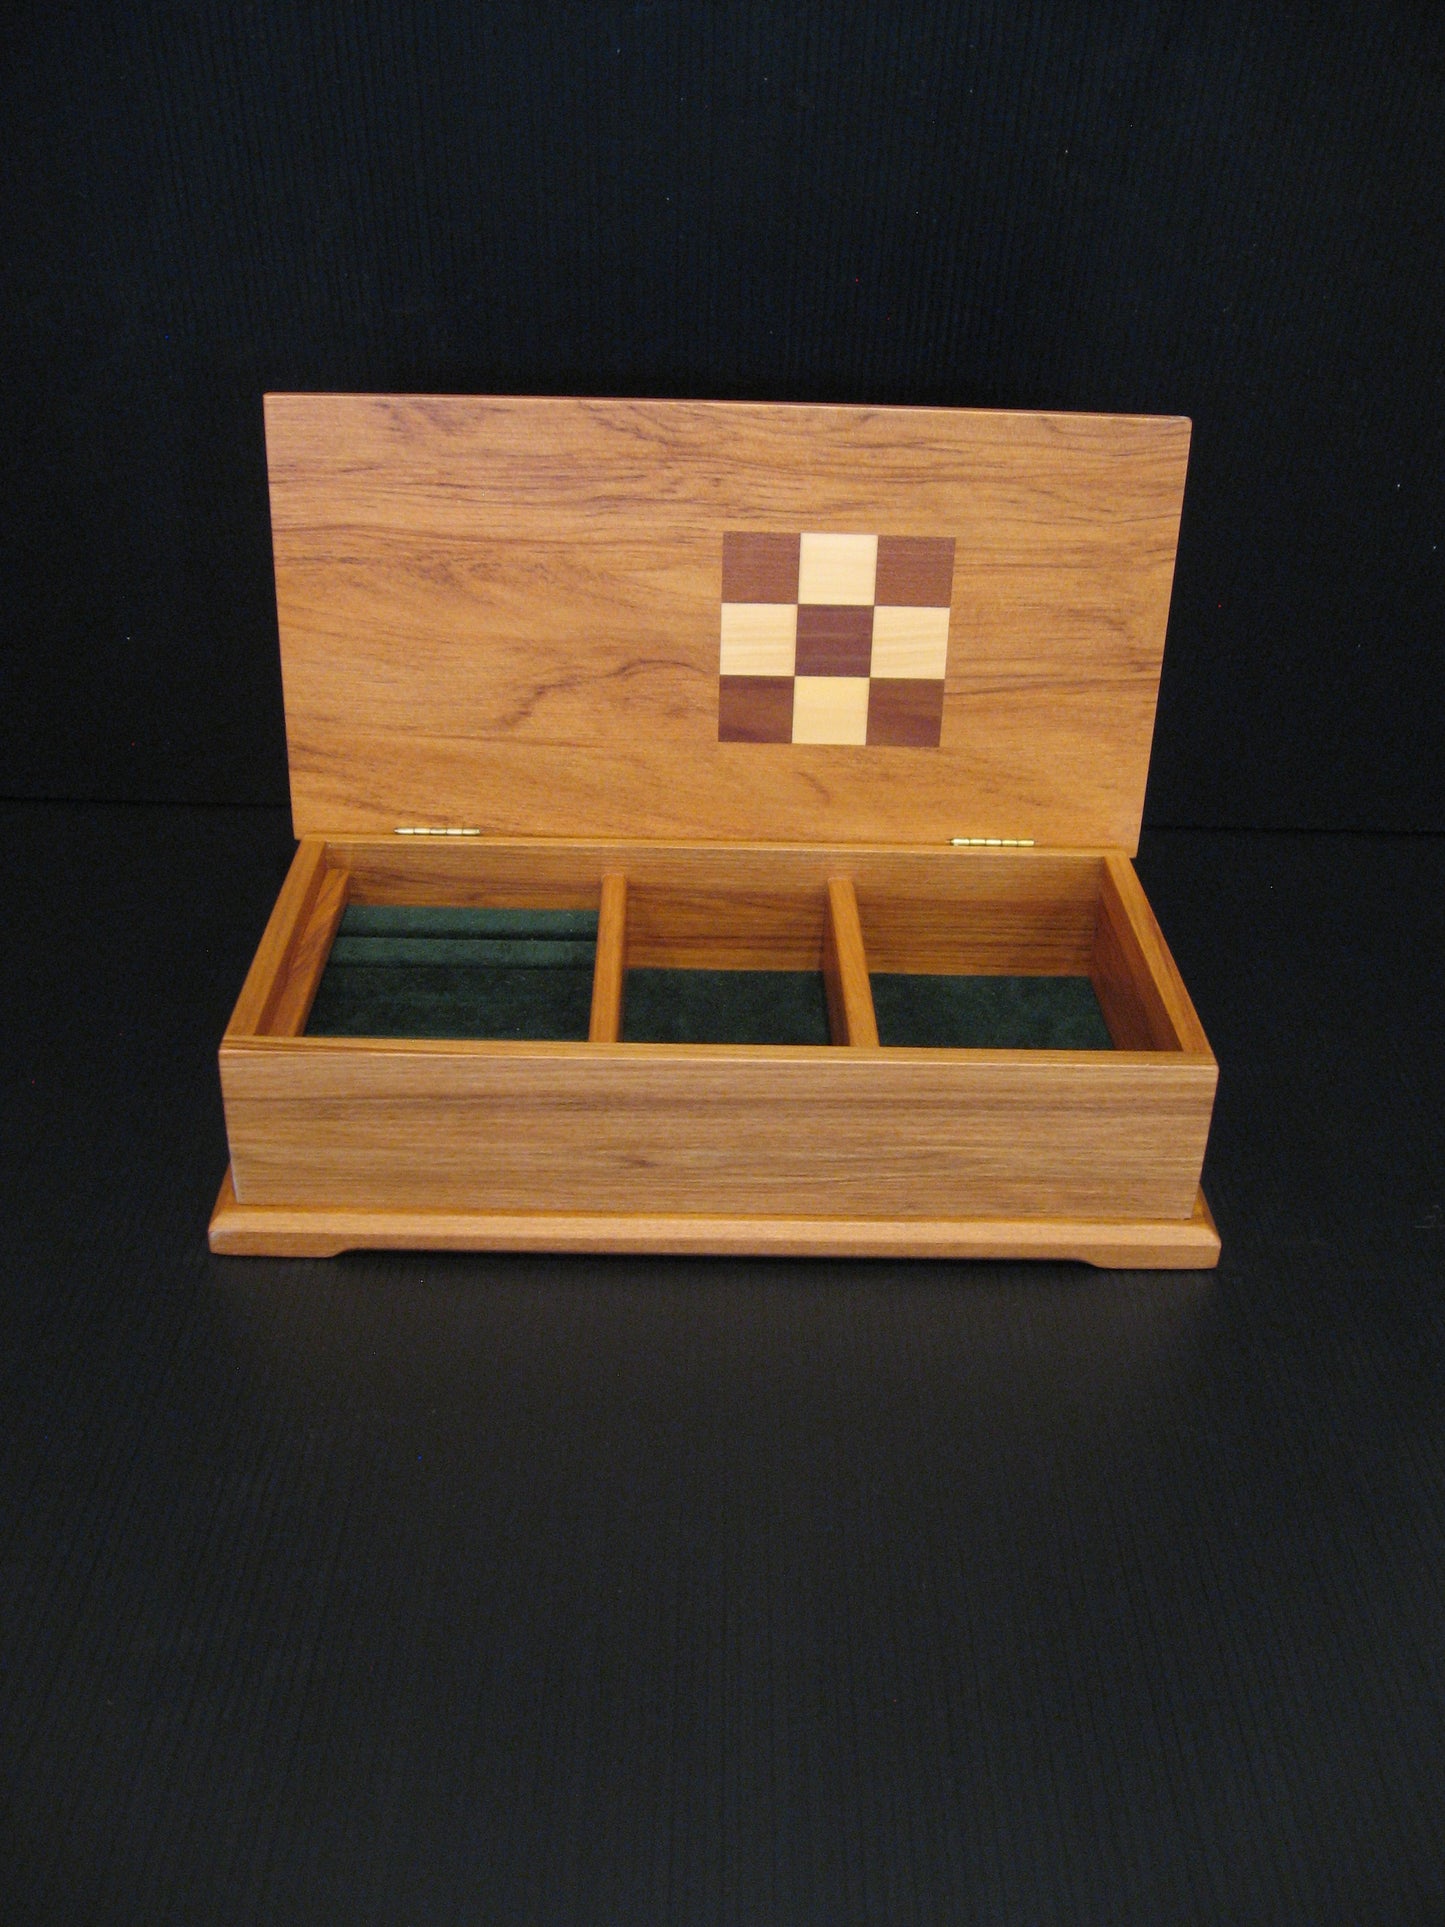 Inside Rimu Wood Jewellery Box with Inlaid Wood from Native Timbers by Timber Arts NZ Silver Fern Gallery